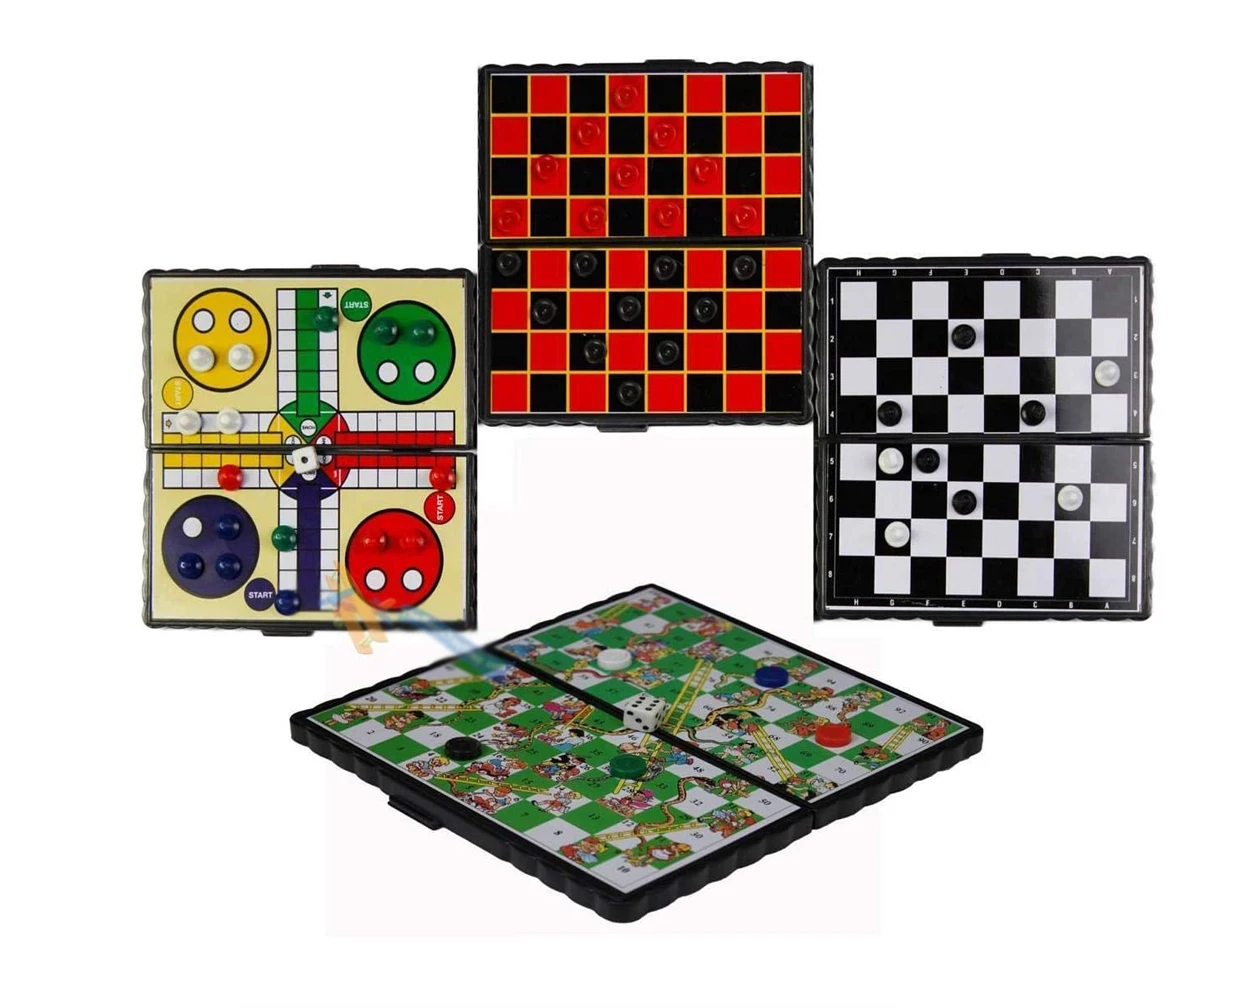 MINI MAGNETIC TRAVEL GAME SNAKES & LADDERS 